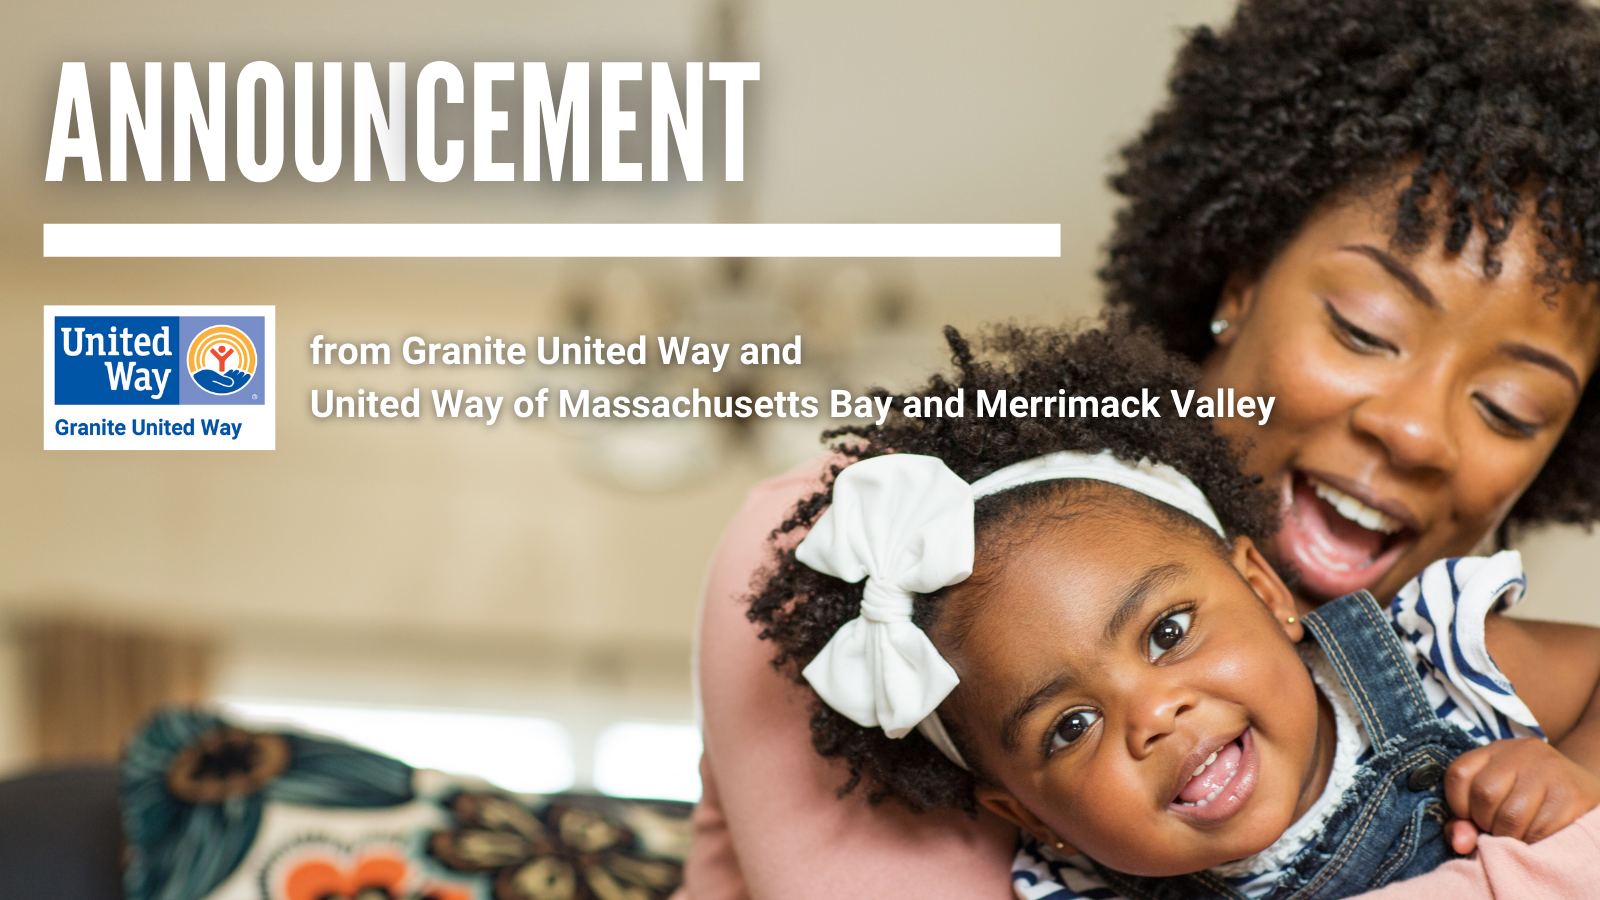 Joint Message from Granite United Way and United Way of Massachusetts Bay and Merrimack Valley